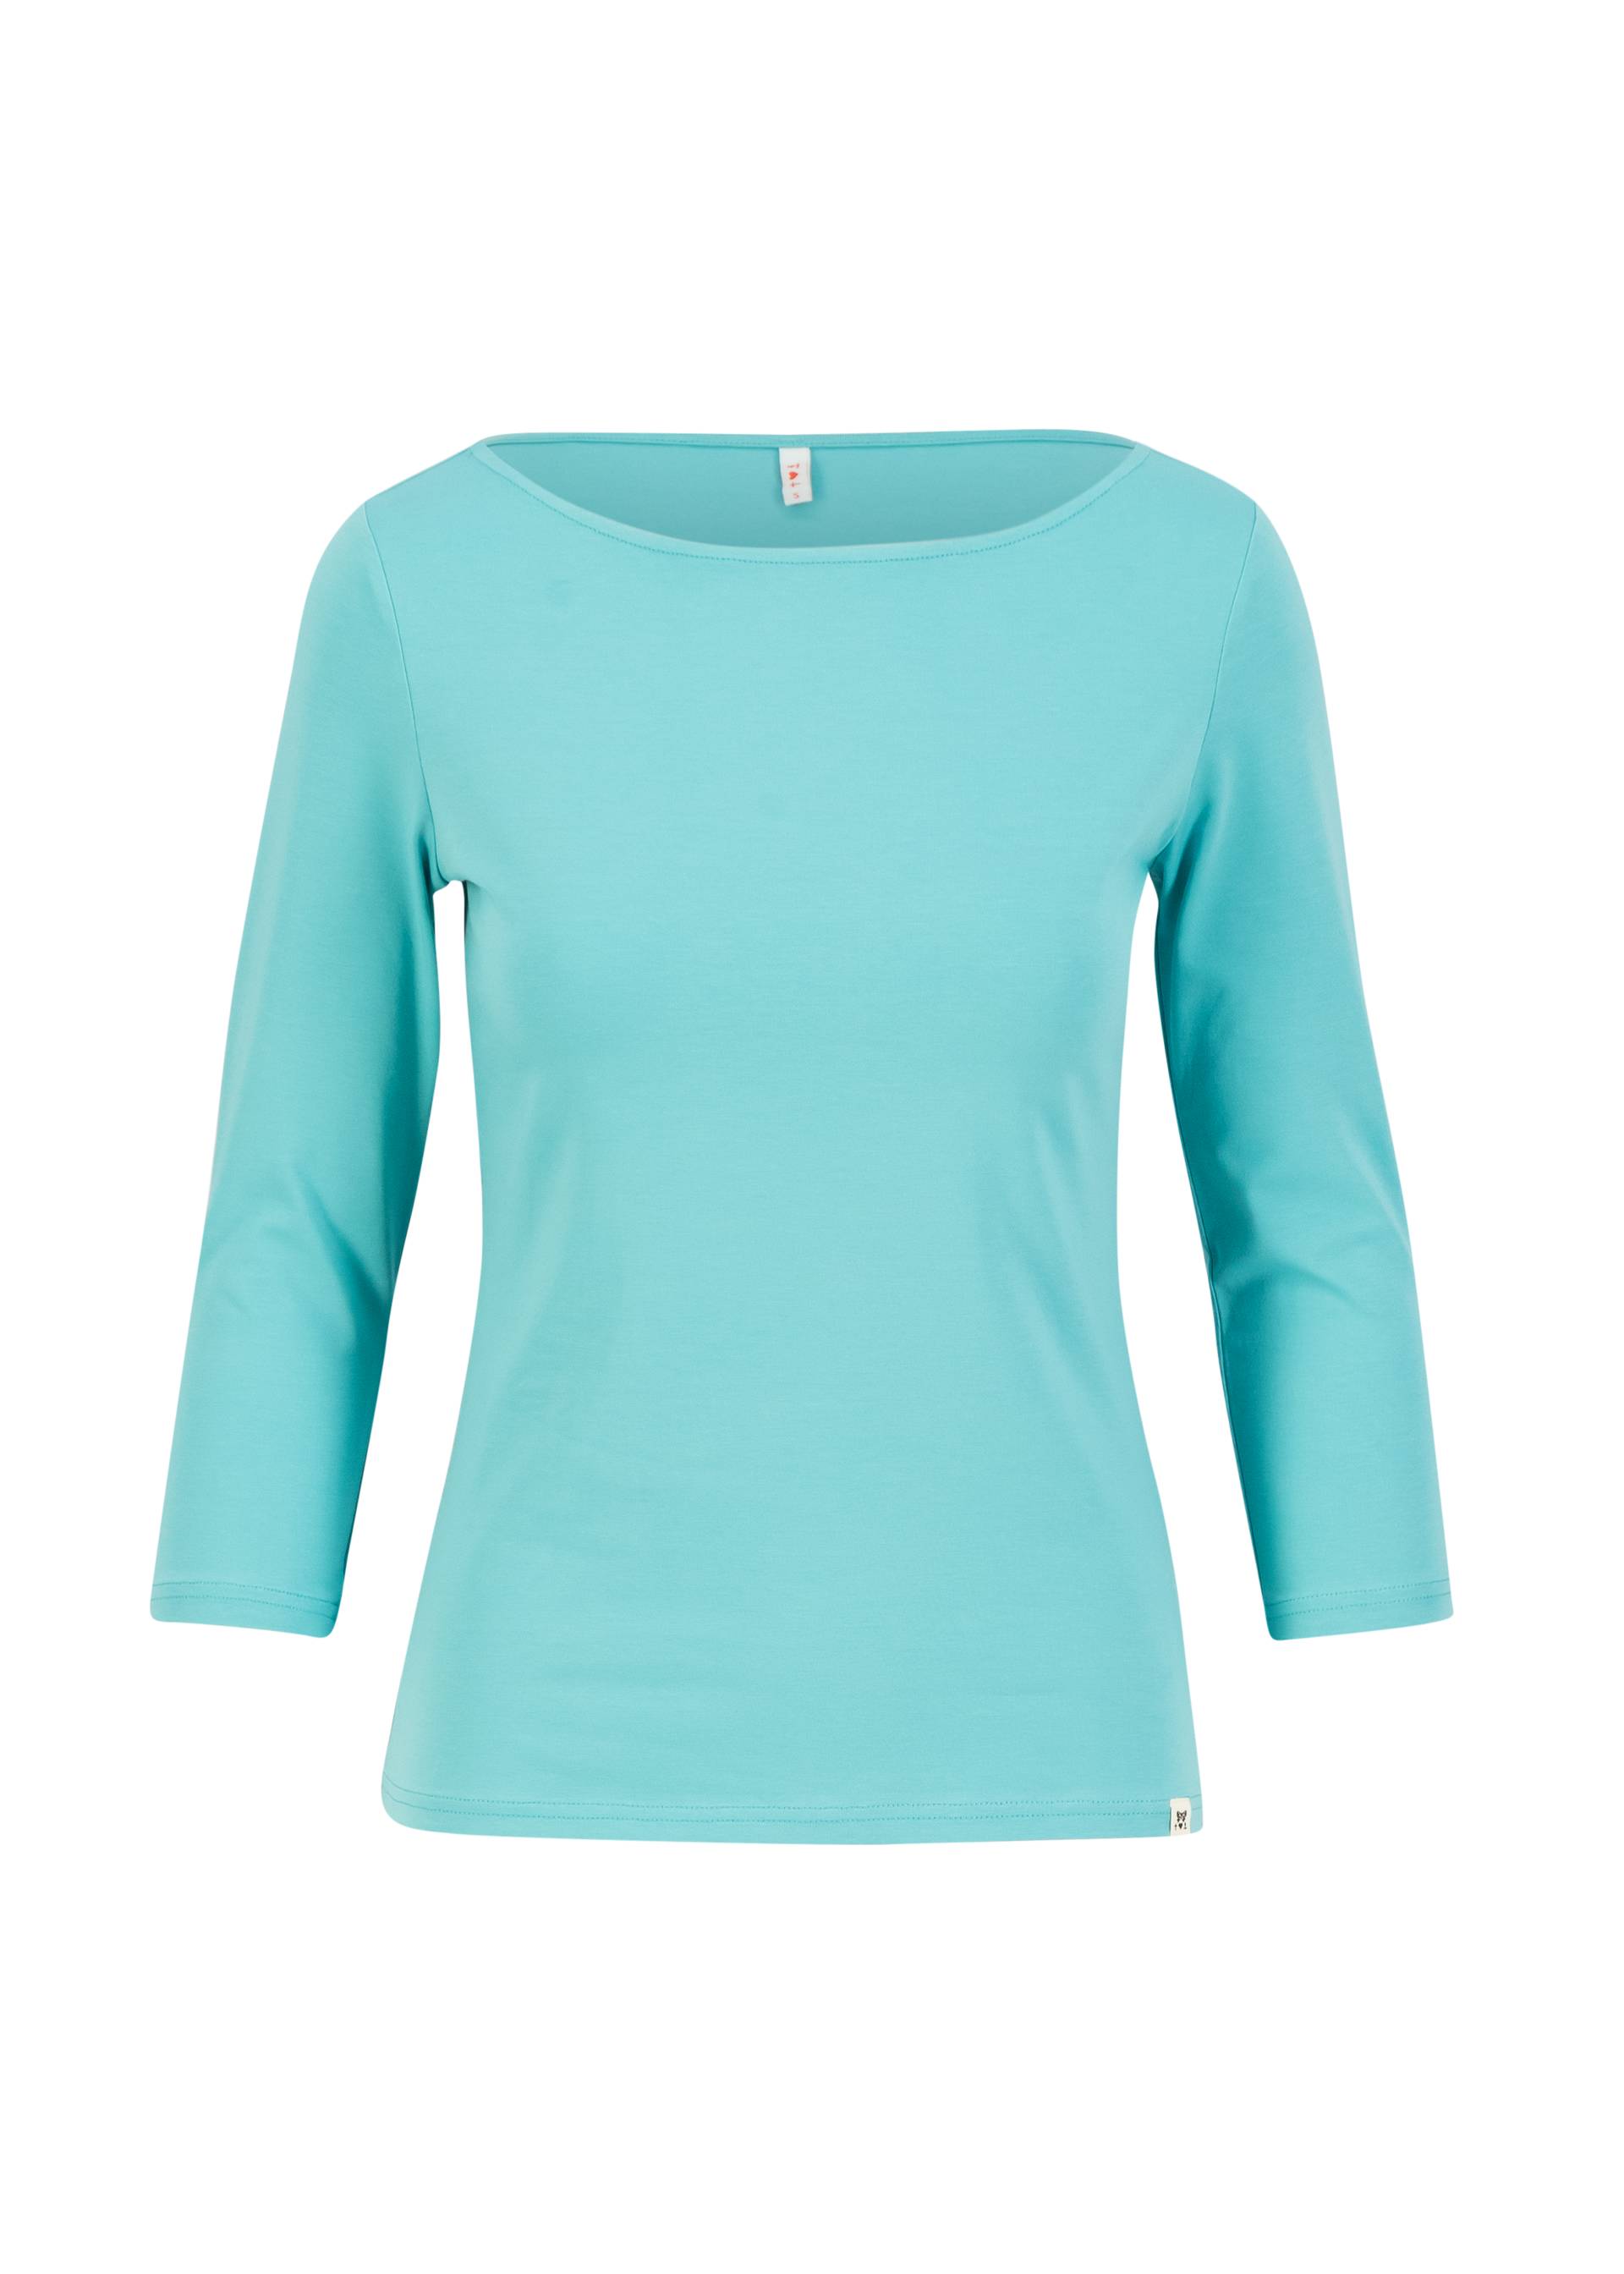 Jersey Top Oh Marine, baby blue, Tops, Blue